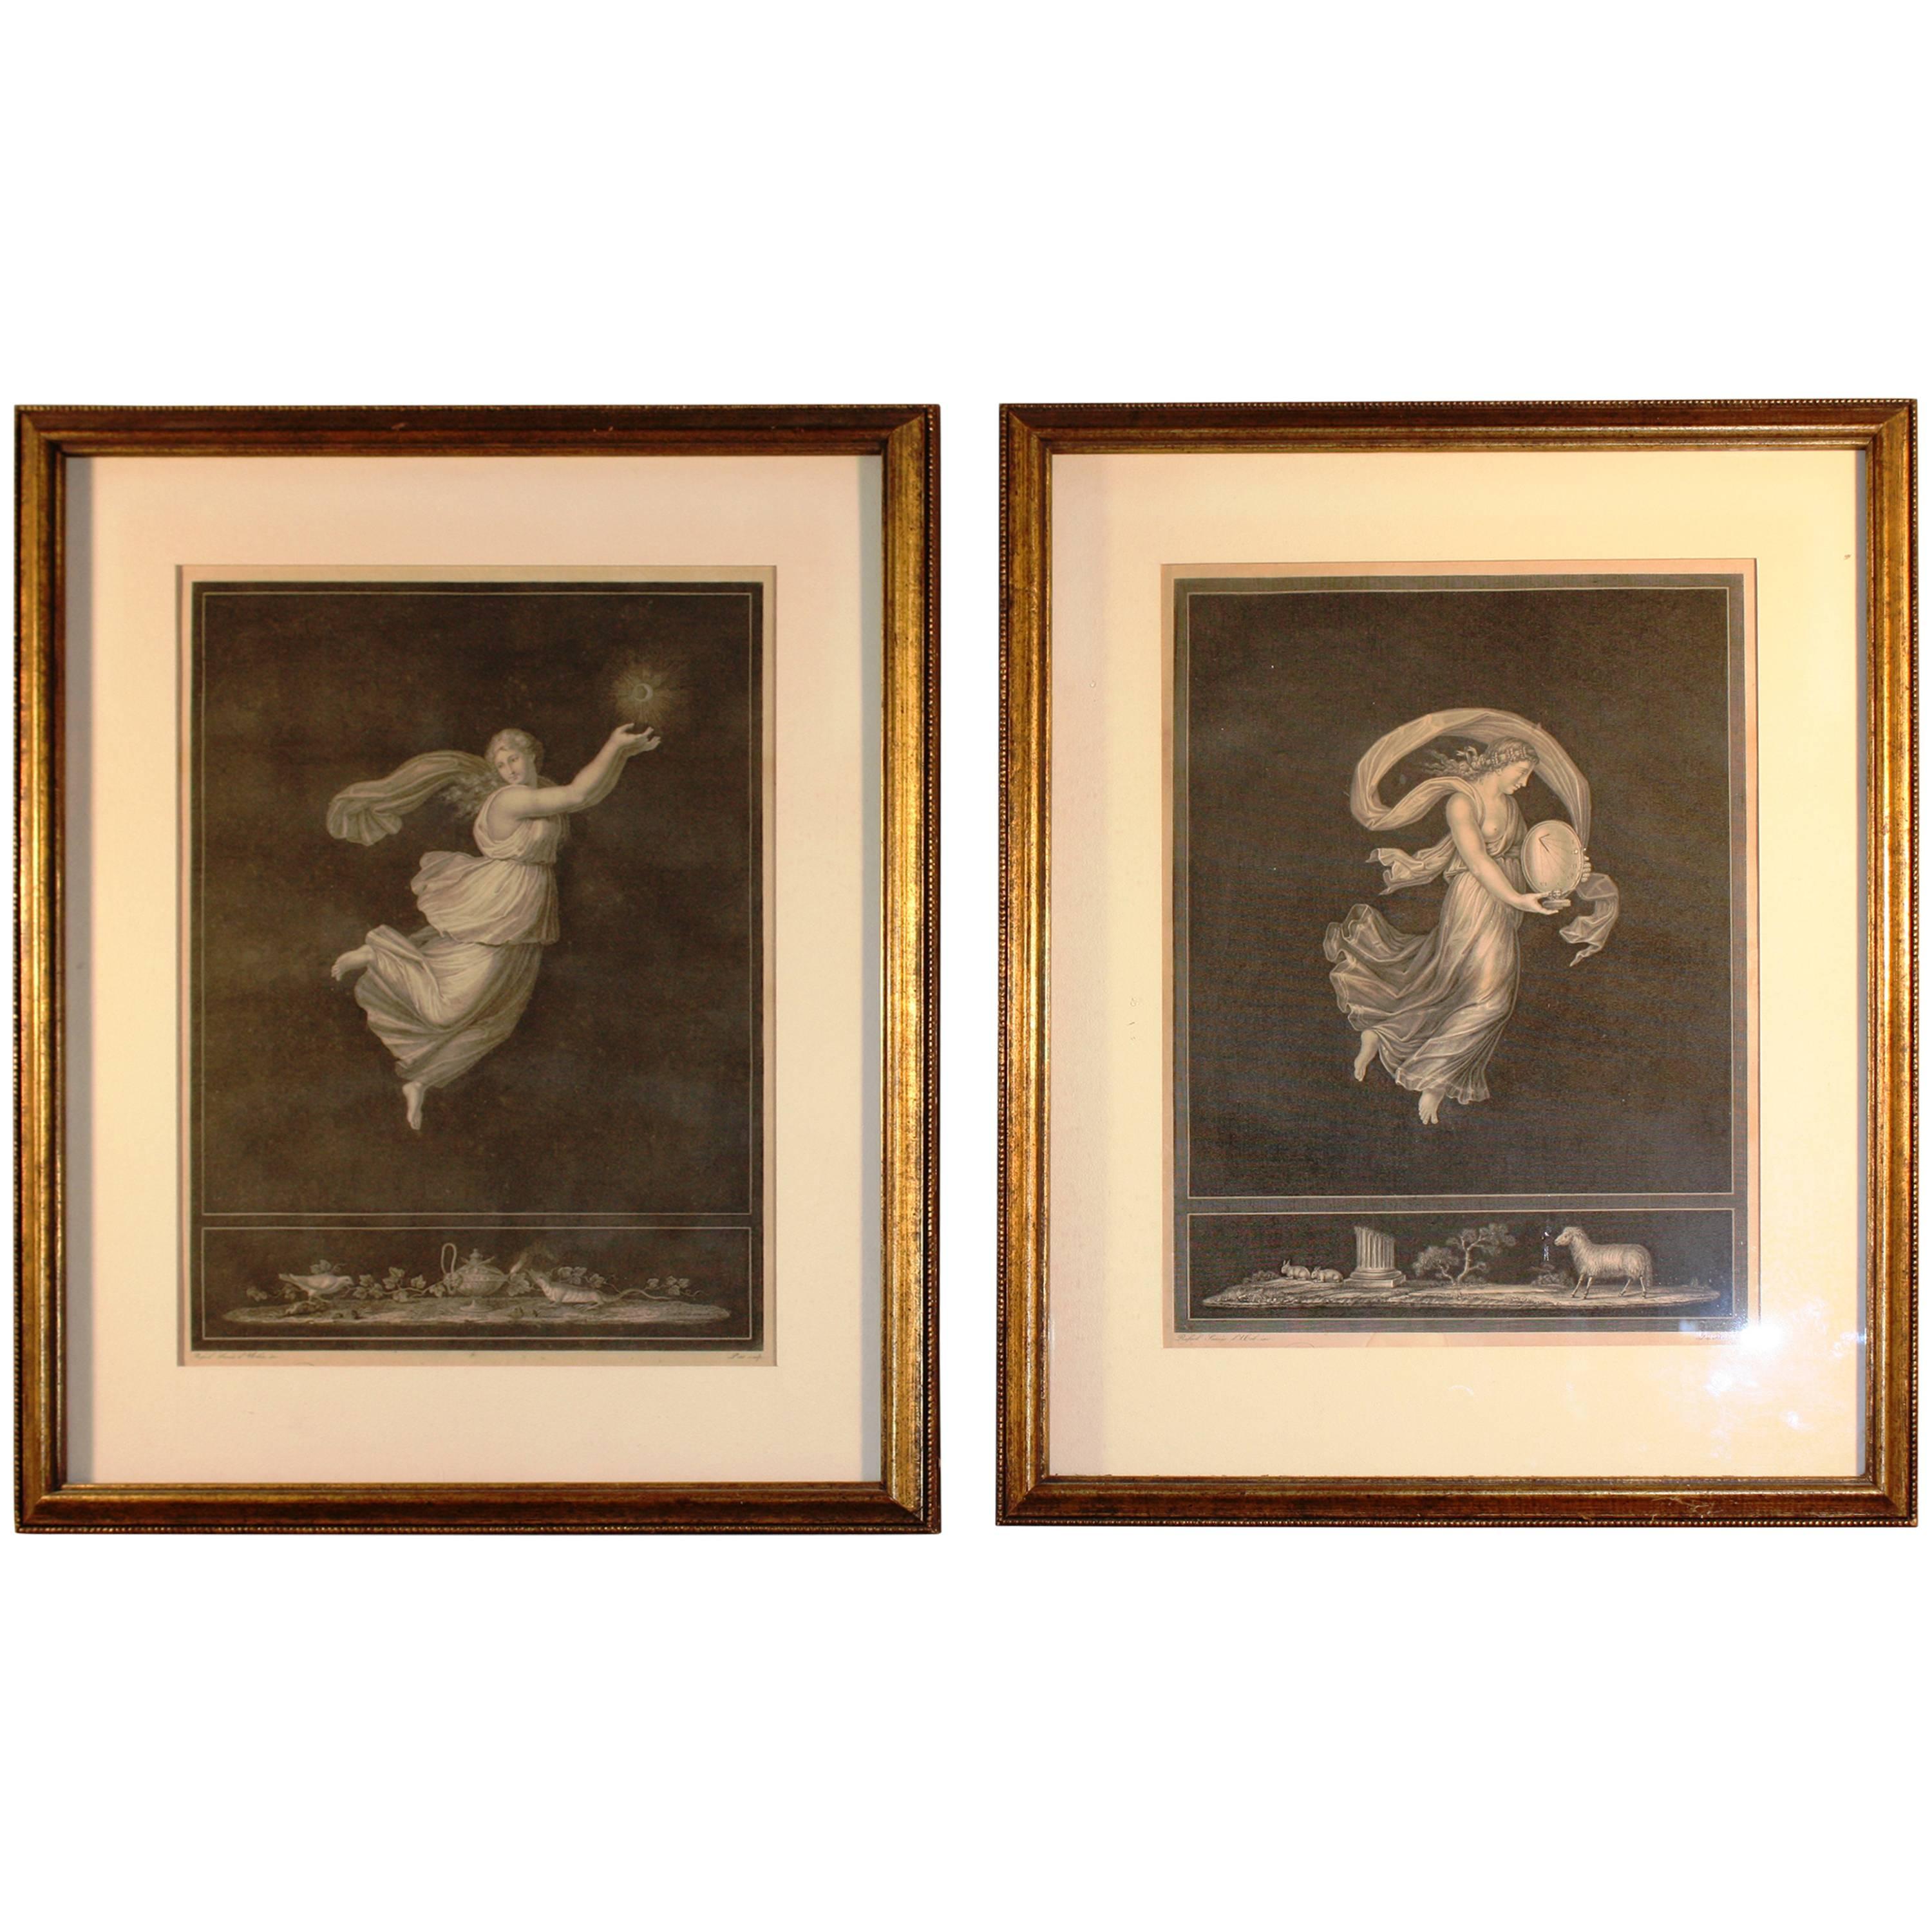 Pair of Early Neoclassical Engravings "Night and Day"